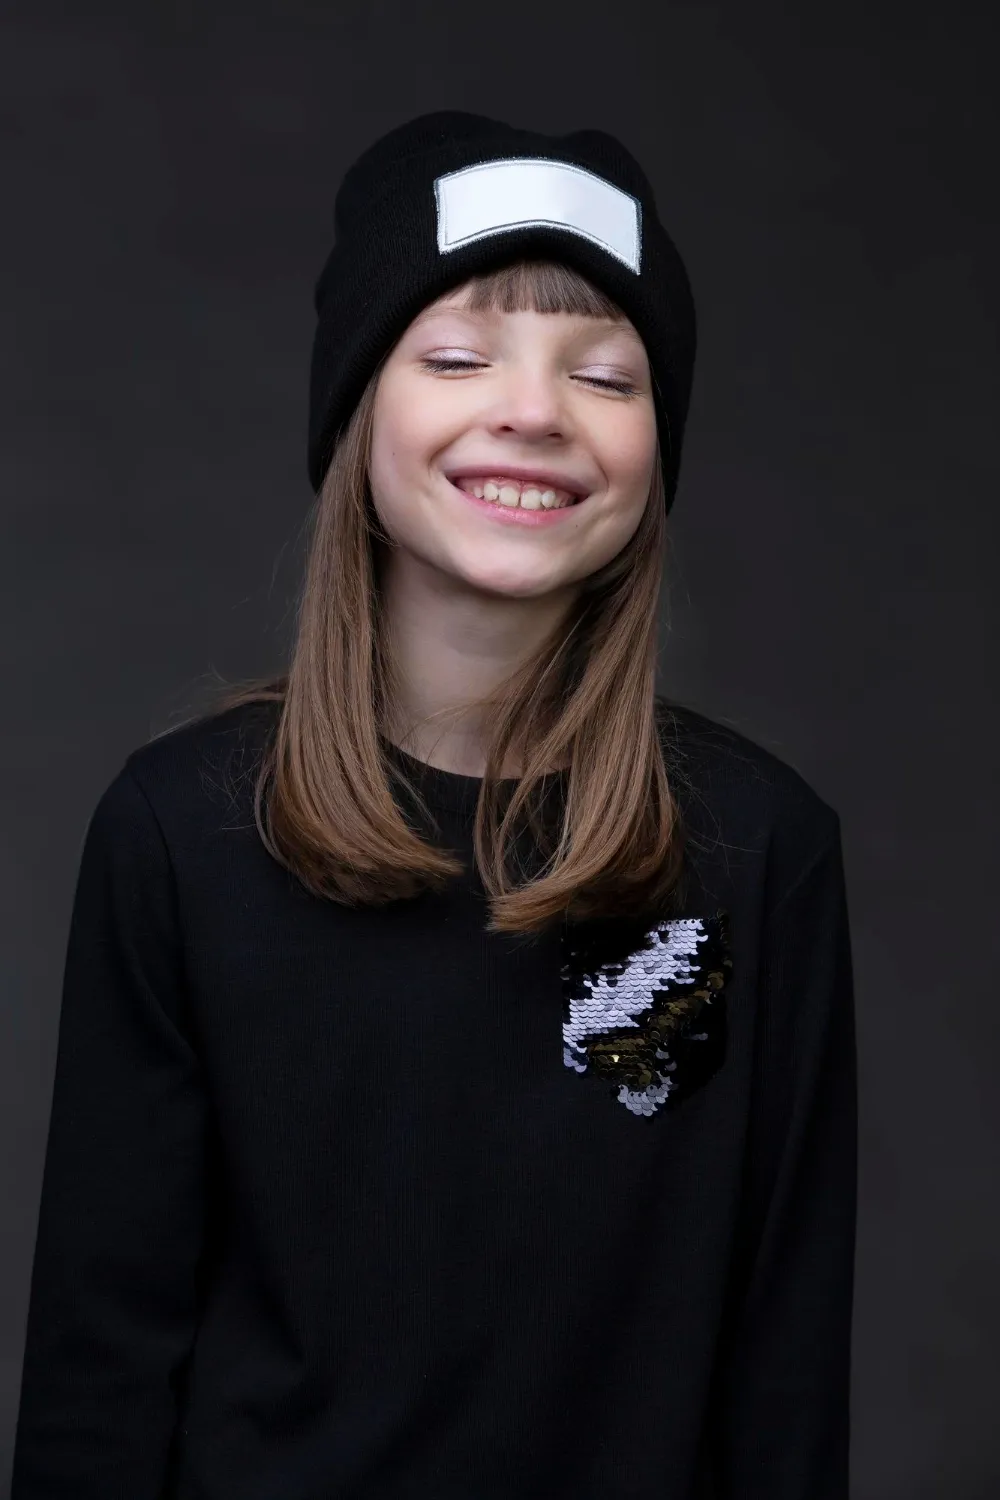 A beautiful teenager girl in a knitted hat smiles cheerfully with closed eyes